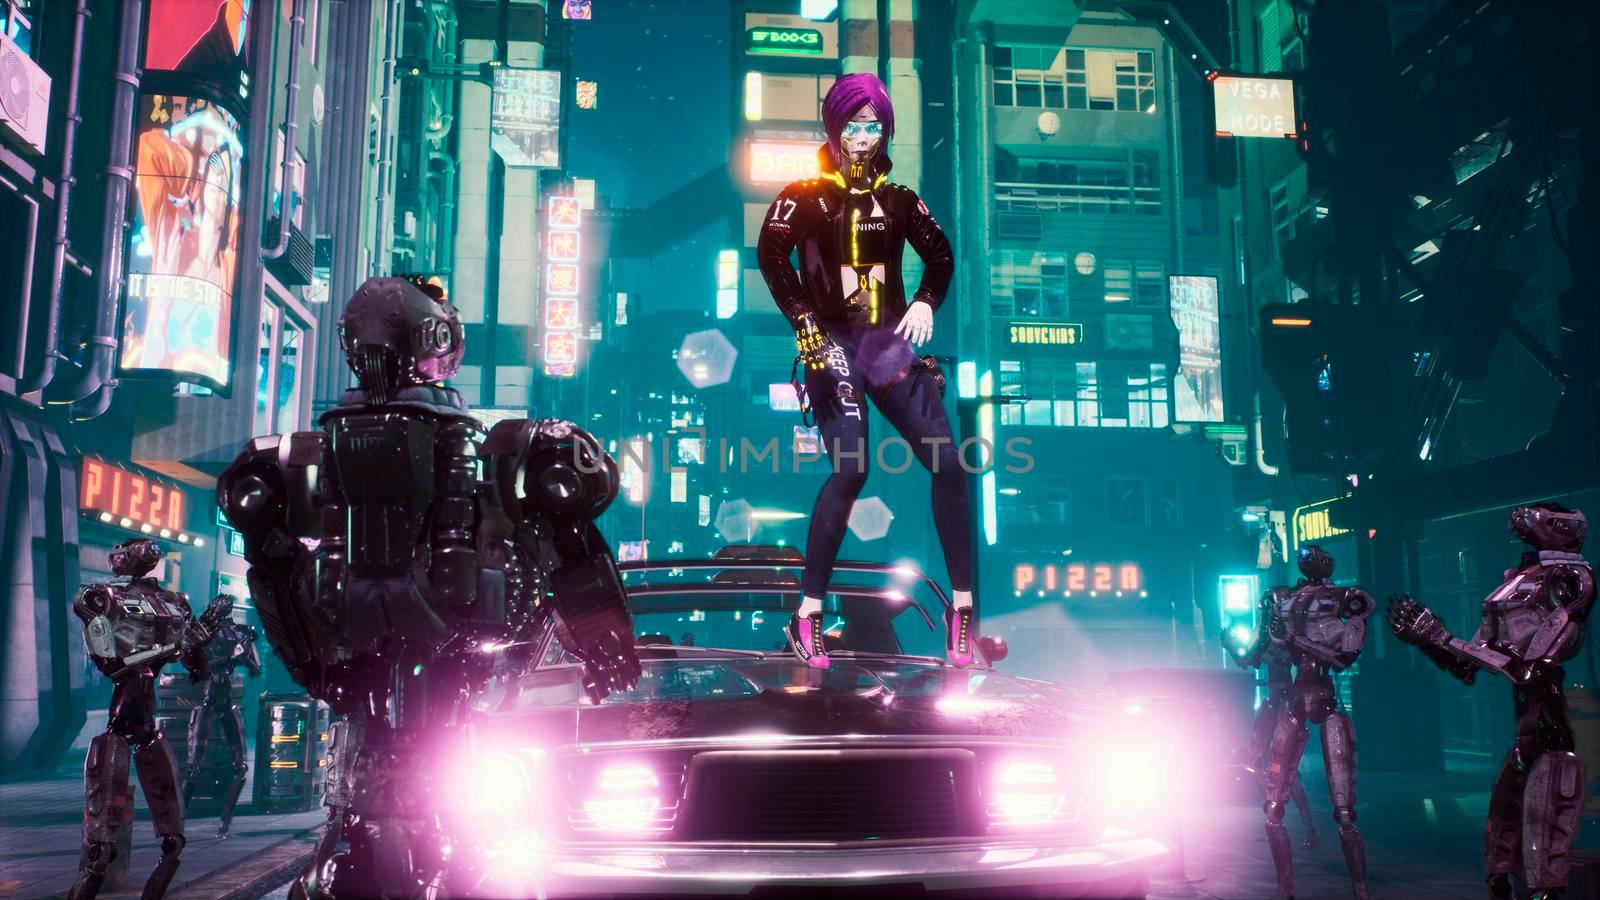 A girl dances hip-hop in a futuristic car, surrounded by android robots on the street of a night city. View of an future fiction city. Sci-fi cyber world concept.